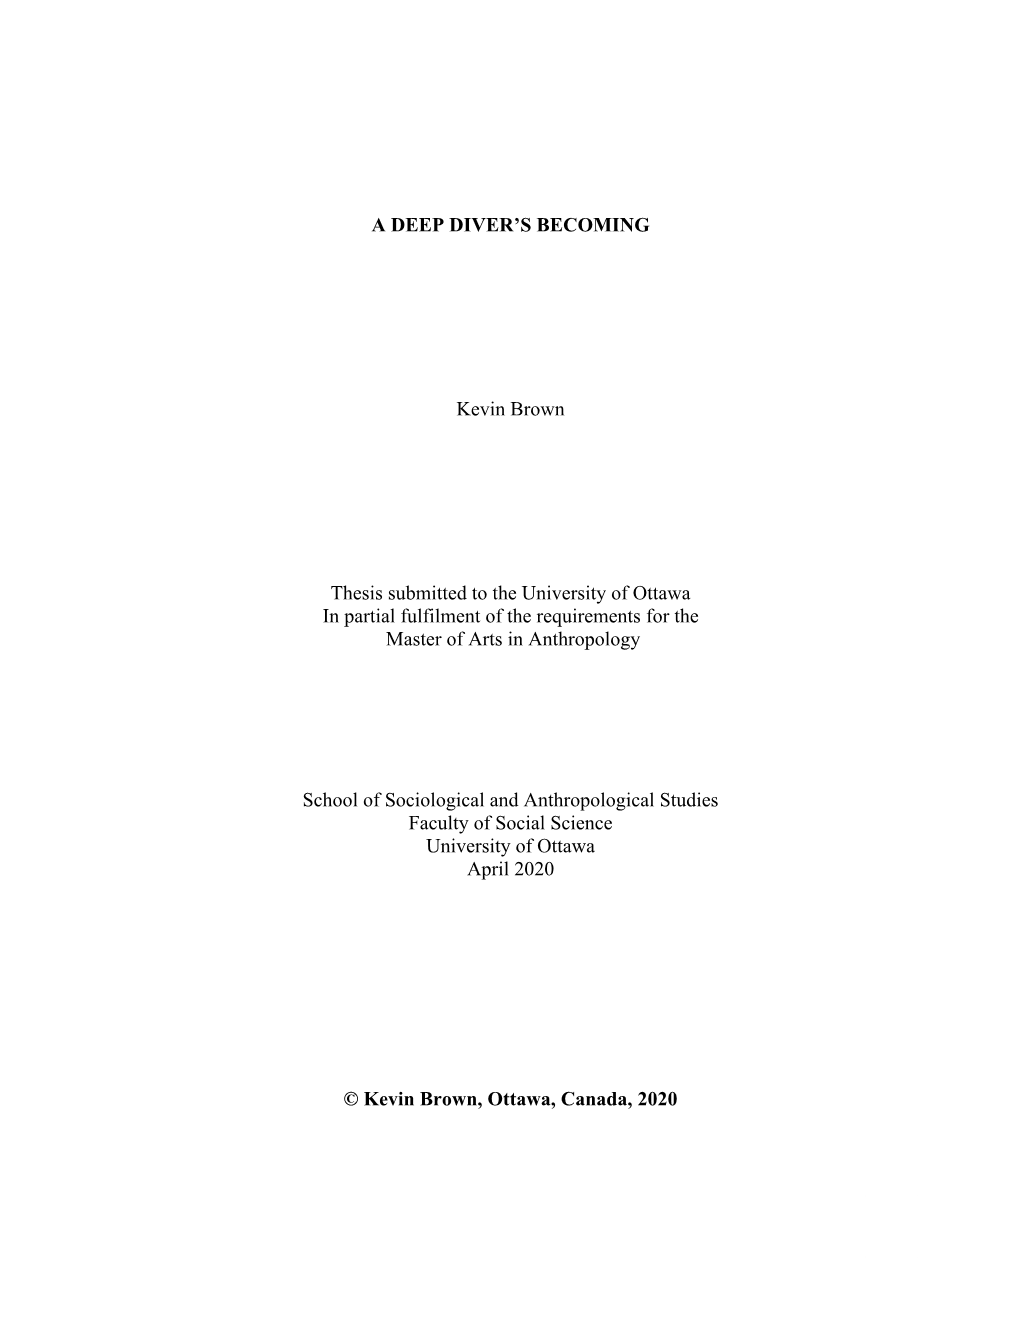 1 a DEEP DIVER's BECOMING Kevin Brown Thesis Submitted to The